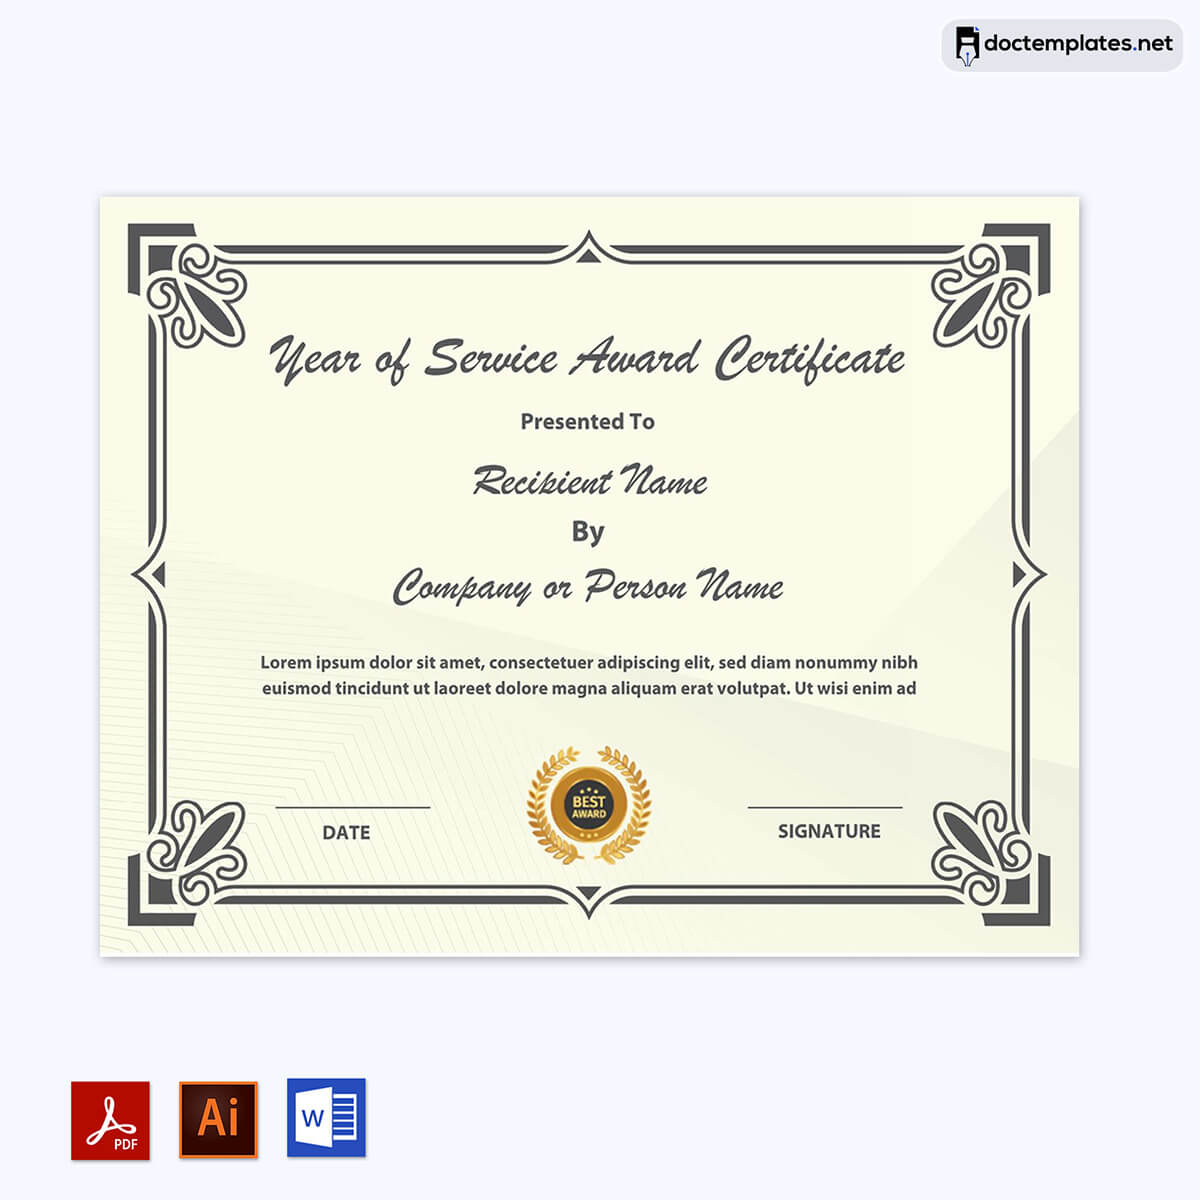 
years of service award certificate templates free